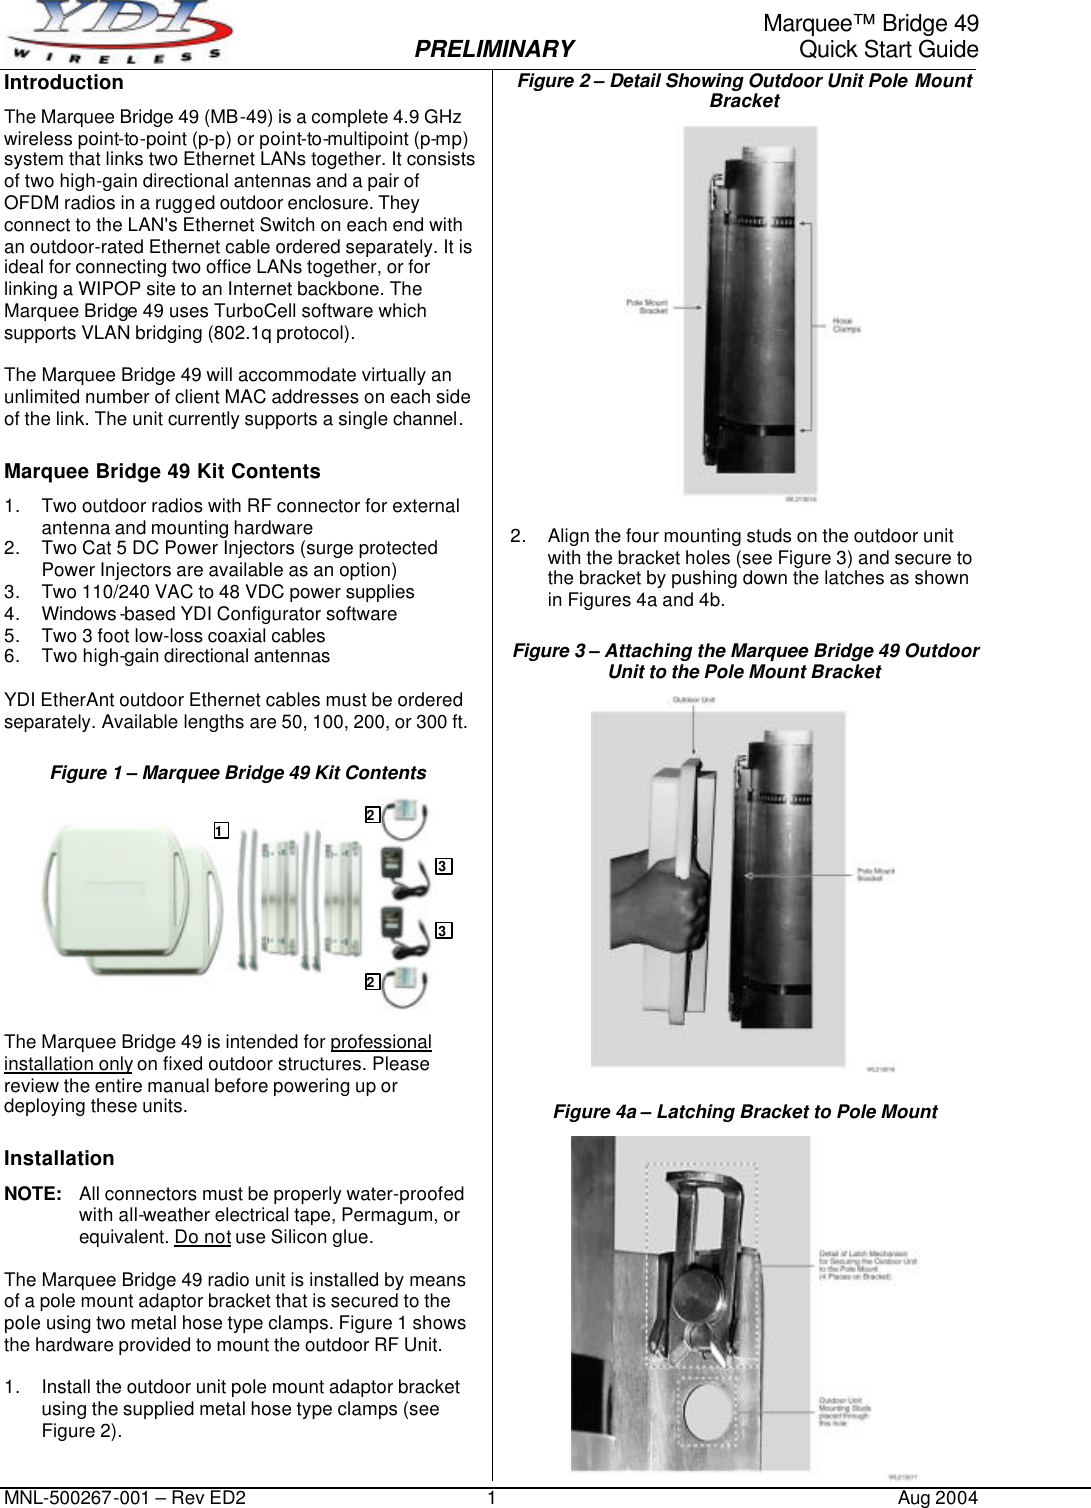     Marquee™ Bridge 49  PRELIMINARY Quick Start Guide MNL-500267-001 – Rev ED2 1 Aug 2004 Introduction The Marquee Bridge 49 (MB-49) is a complete 4.9 GHz wireless point-to-point (p-p) or point-to-multipoint (p-mp) system that links two Ethernet LANs together. It consists of two high-gain directional antennas and a pair of OFDM radios in a rugged outdoor enclosure. They connect to the LAN&apos;s Ethernet Switch on each end with an outdoor-rated Ethernet cable ordered separately. It is ideal for connecting two office LANs together, or for linking a WIPOP site to an Internet backbone. The Marquee Bridge 49 uses TurboCell software which supports VLAN bridging (802.1q protocol).  The Marquee Bridge 49 will accommodate virtually an unlimited number of client MAC addresses on each side of the link. The unit currently supports a single channel. Marquee Bridge 49 Kit Contents 1. Two outdoor radios with RF connector for external antenna and mounting hardware 2. Two Cat 5 DC Power Injectors (surge protected Power Injectors are available as an option) 3. Two 110/240 VAC to 48 VDC power supplies  4. Windows -based YDI Configurator software 5. Two 3 foot low-loss coaxial cables 6. Two high-gain directional antennas   YDI EtherAnt outdoor Ethernet cables must be ordered separately. Available lengths are 50, 100, 200, or 300 ft. Figure 1 – Marquee Bridge 49 Kit Contents   The Marquee Bridge 49 is intended for professional installation only on fixed outdoor structures. Please review the entire manual before powering up or deploying these units. Installation NOTE: All connectors must be properly water-proofed with all-weather electrical tape, Permagum, or equivalent. Do not use Silicon glue.  The Marquee Bridge 49 radio unit is installed by means of a pole mount adaptor bracket that is secured to the pole using two metal hose type clamps. Figure 1 shows the hardware provided to mount the outdoor RF Unit.  1. Install the outdoor unit pole mount adaptor bracket using the supplied metal hose type clamps (see Figure 2). Figure 2 – Detail Showing Outdoor Unit Pole Mount Bracket   2. Align the four mounting studs on the outdoor unit with the bracket holes (see Figure 3) and secure to the bracket by pushing down the latches as shown in Figures 4a and 4b. Figure 3 – Attaching the Marquee Bridge 49 Outdoor Unit to the Pole Mount Bracket  Figure 4a – Latching Bracket to Pole Mount  1 2 3 2 3 